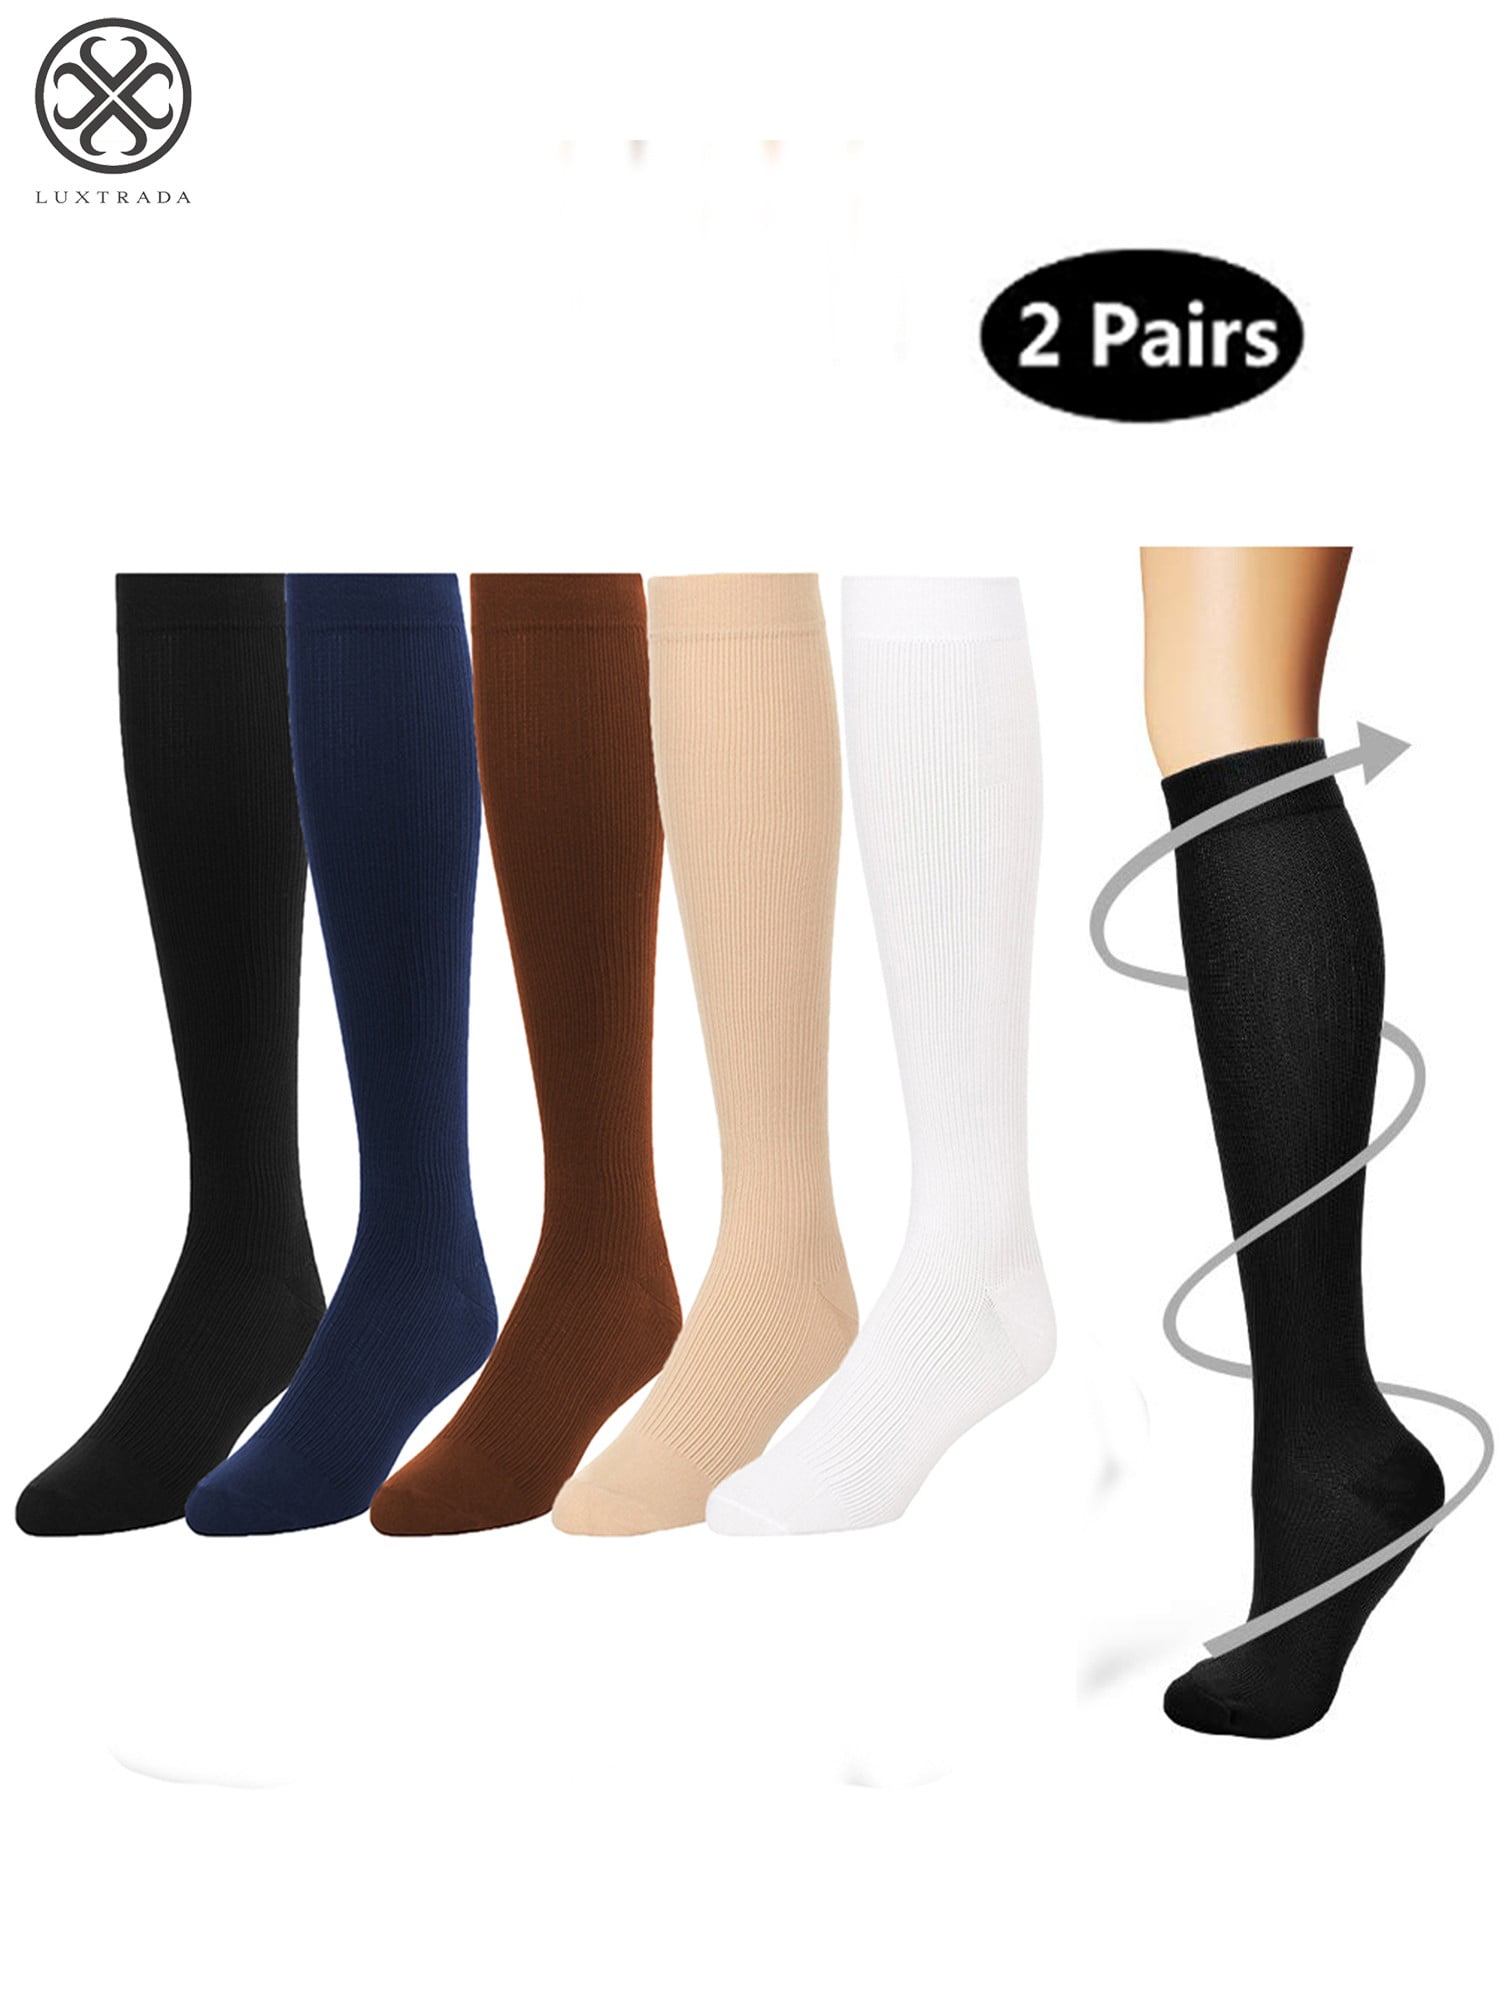 2 Pairs 30-40 mmhg Over Knee High Socks Compression Running Gym Sports Stockings 